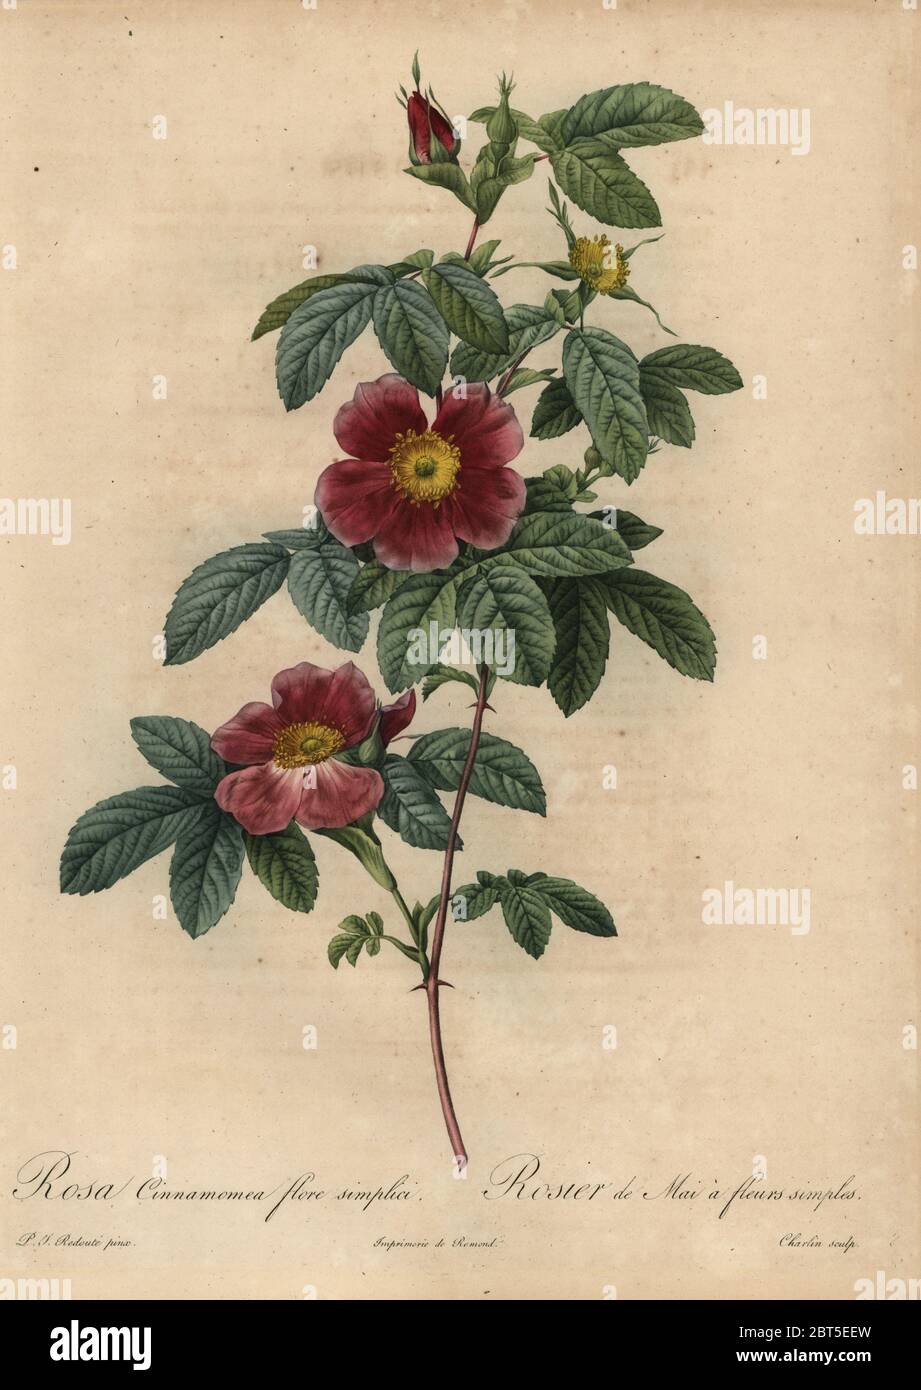 Cinnamon rose, Rosa majalis. Rosa cinnamomea flore simplica, Rosier de Mai a fleurs simples. Stipple copperplate engraving by Jean Louis Auguste Charlin handcoloured a la poupee after a botanical illustration by Pierre-Joseph Redoute from the first folio edition of Les Roses, Firmin Didot, Paris, 1817. Stock Photo